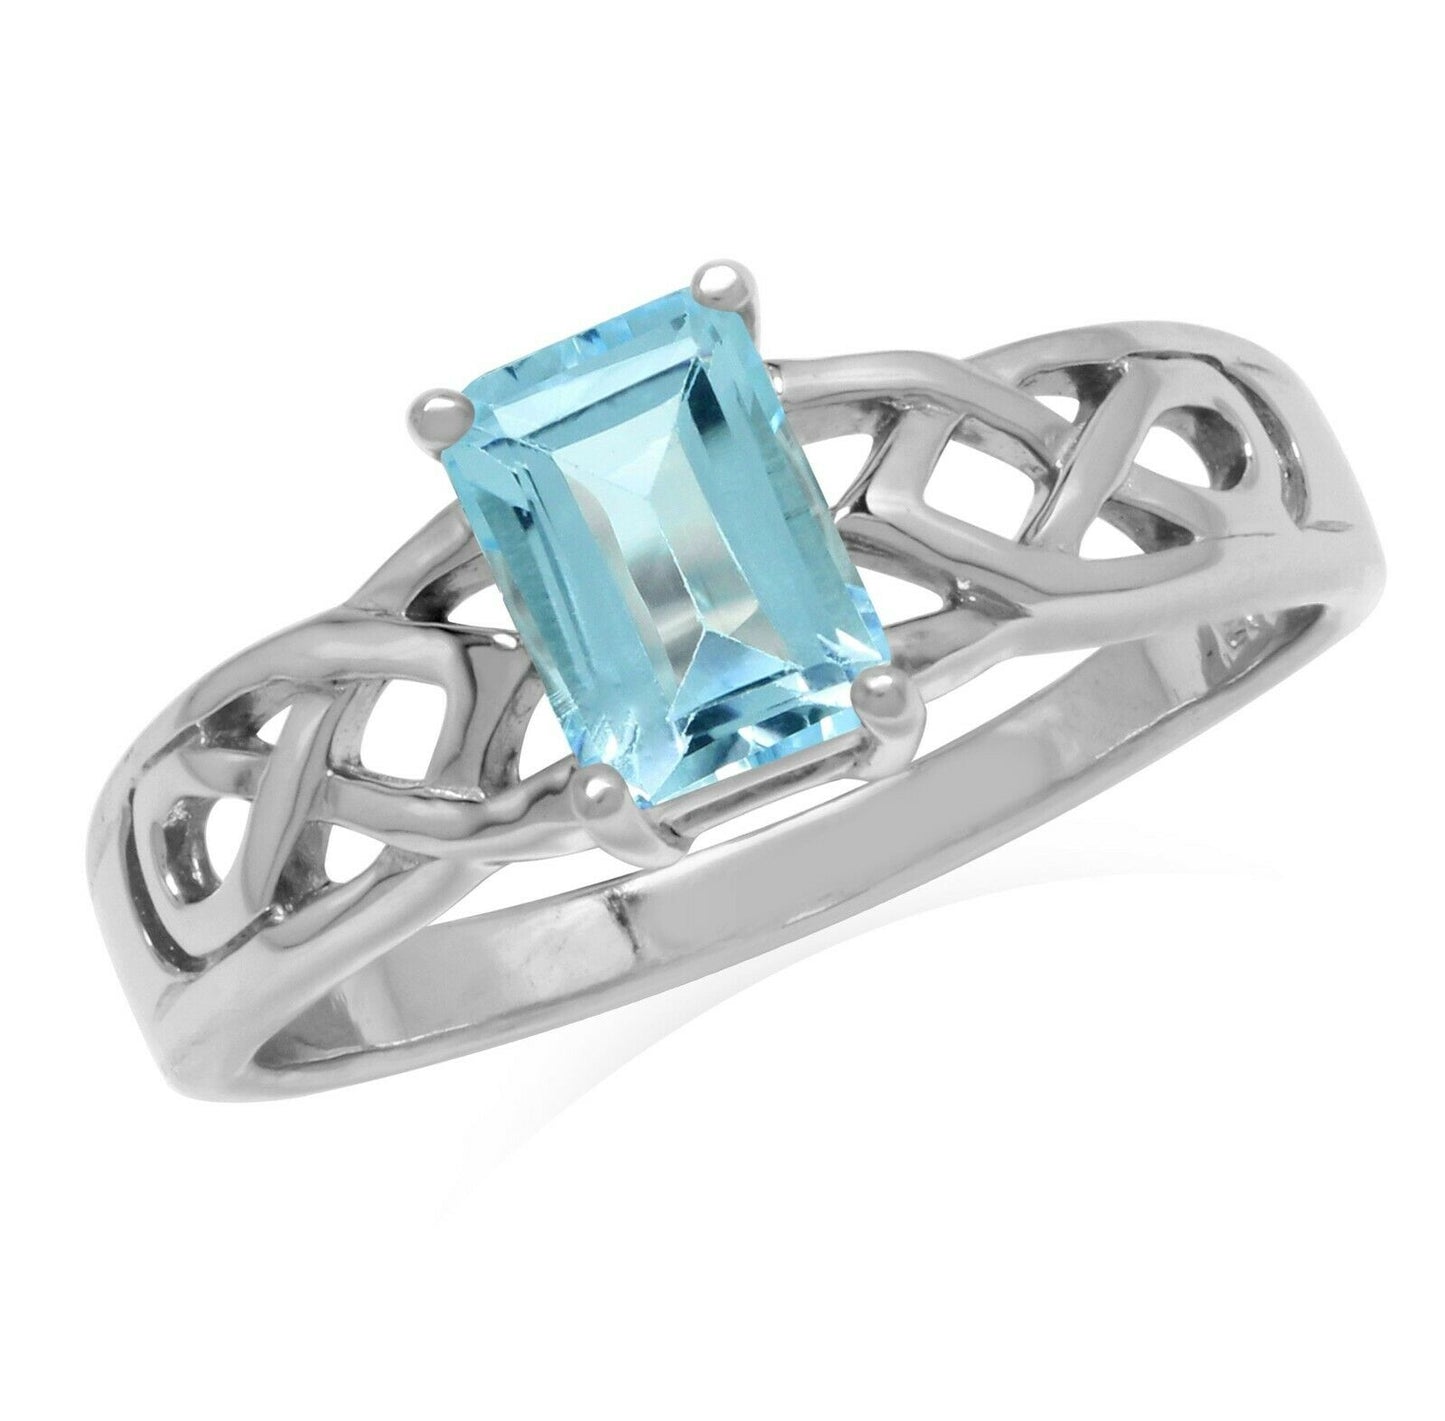 Genuine Octagon Blue Topaz 925 Sterling Silver Celtic Knot Ring- Size 8